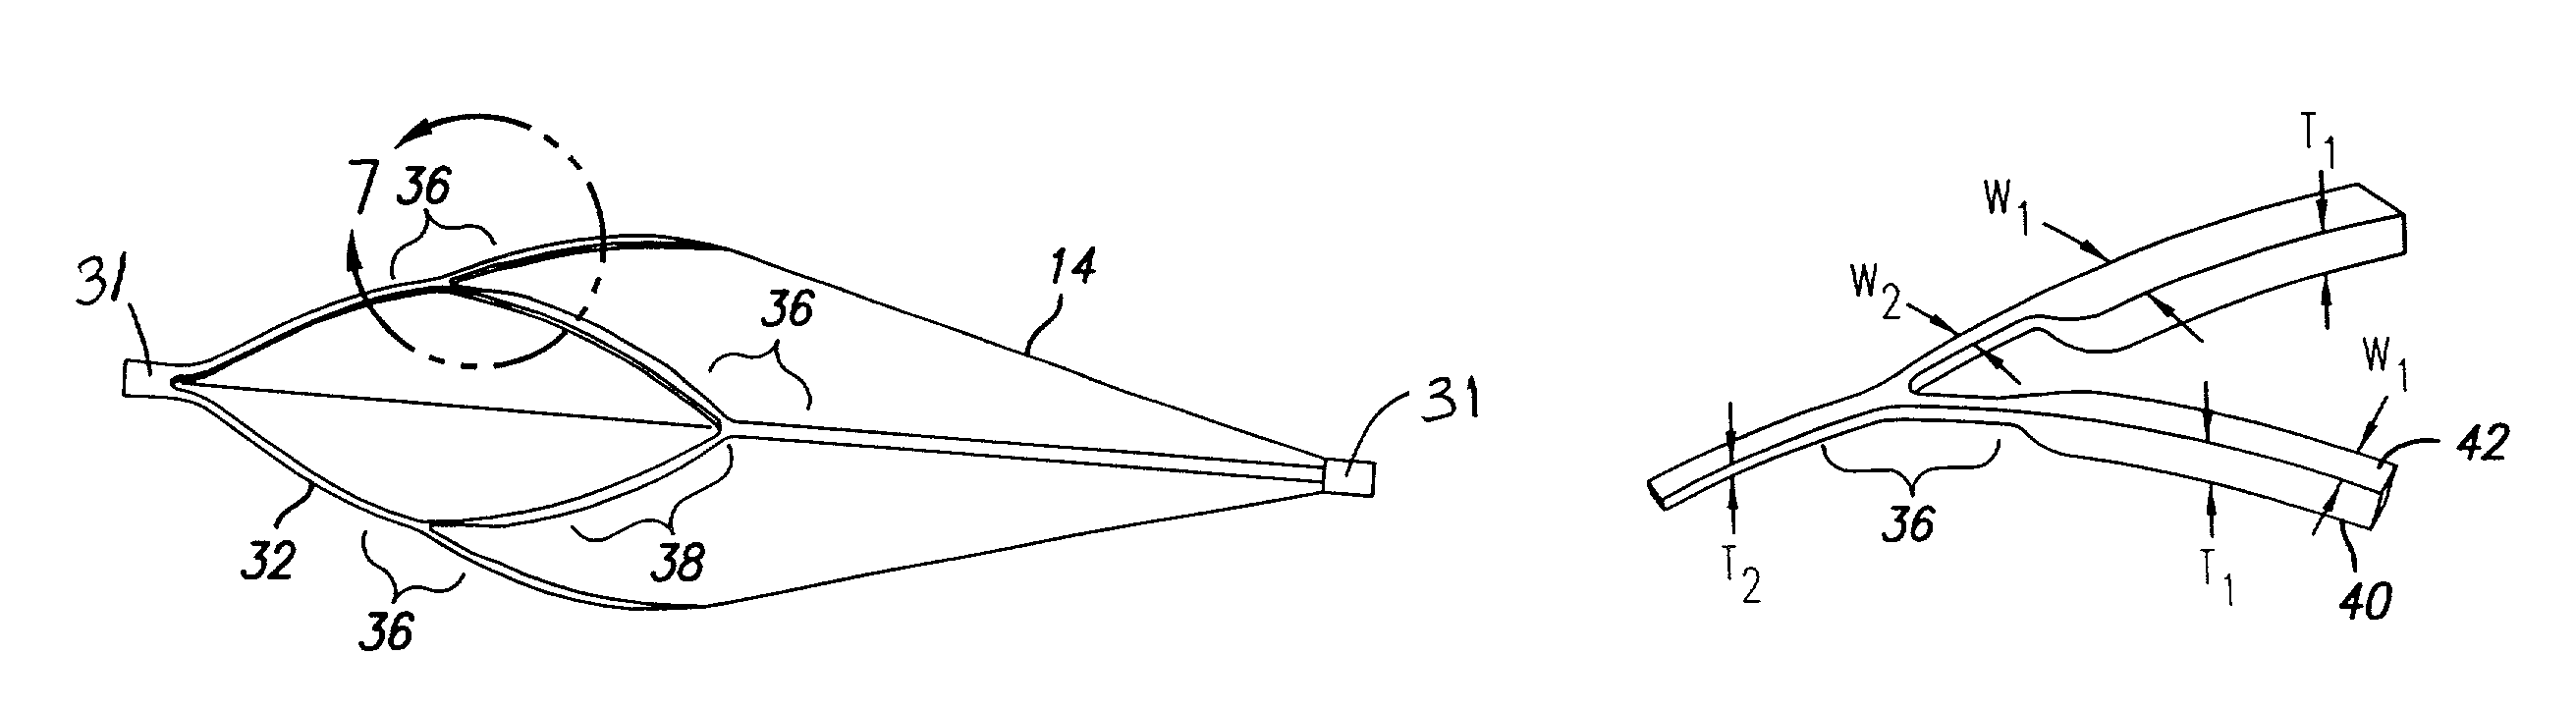 Variable thickness embolic filtering devices and method of manufacturing the same